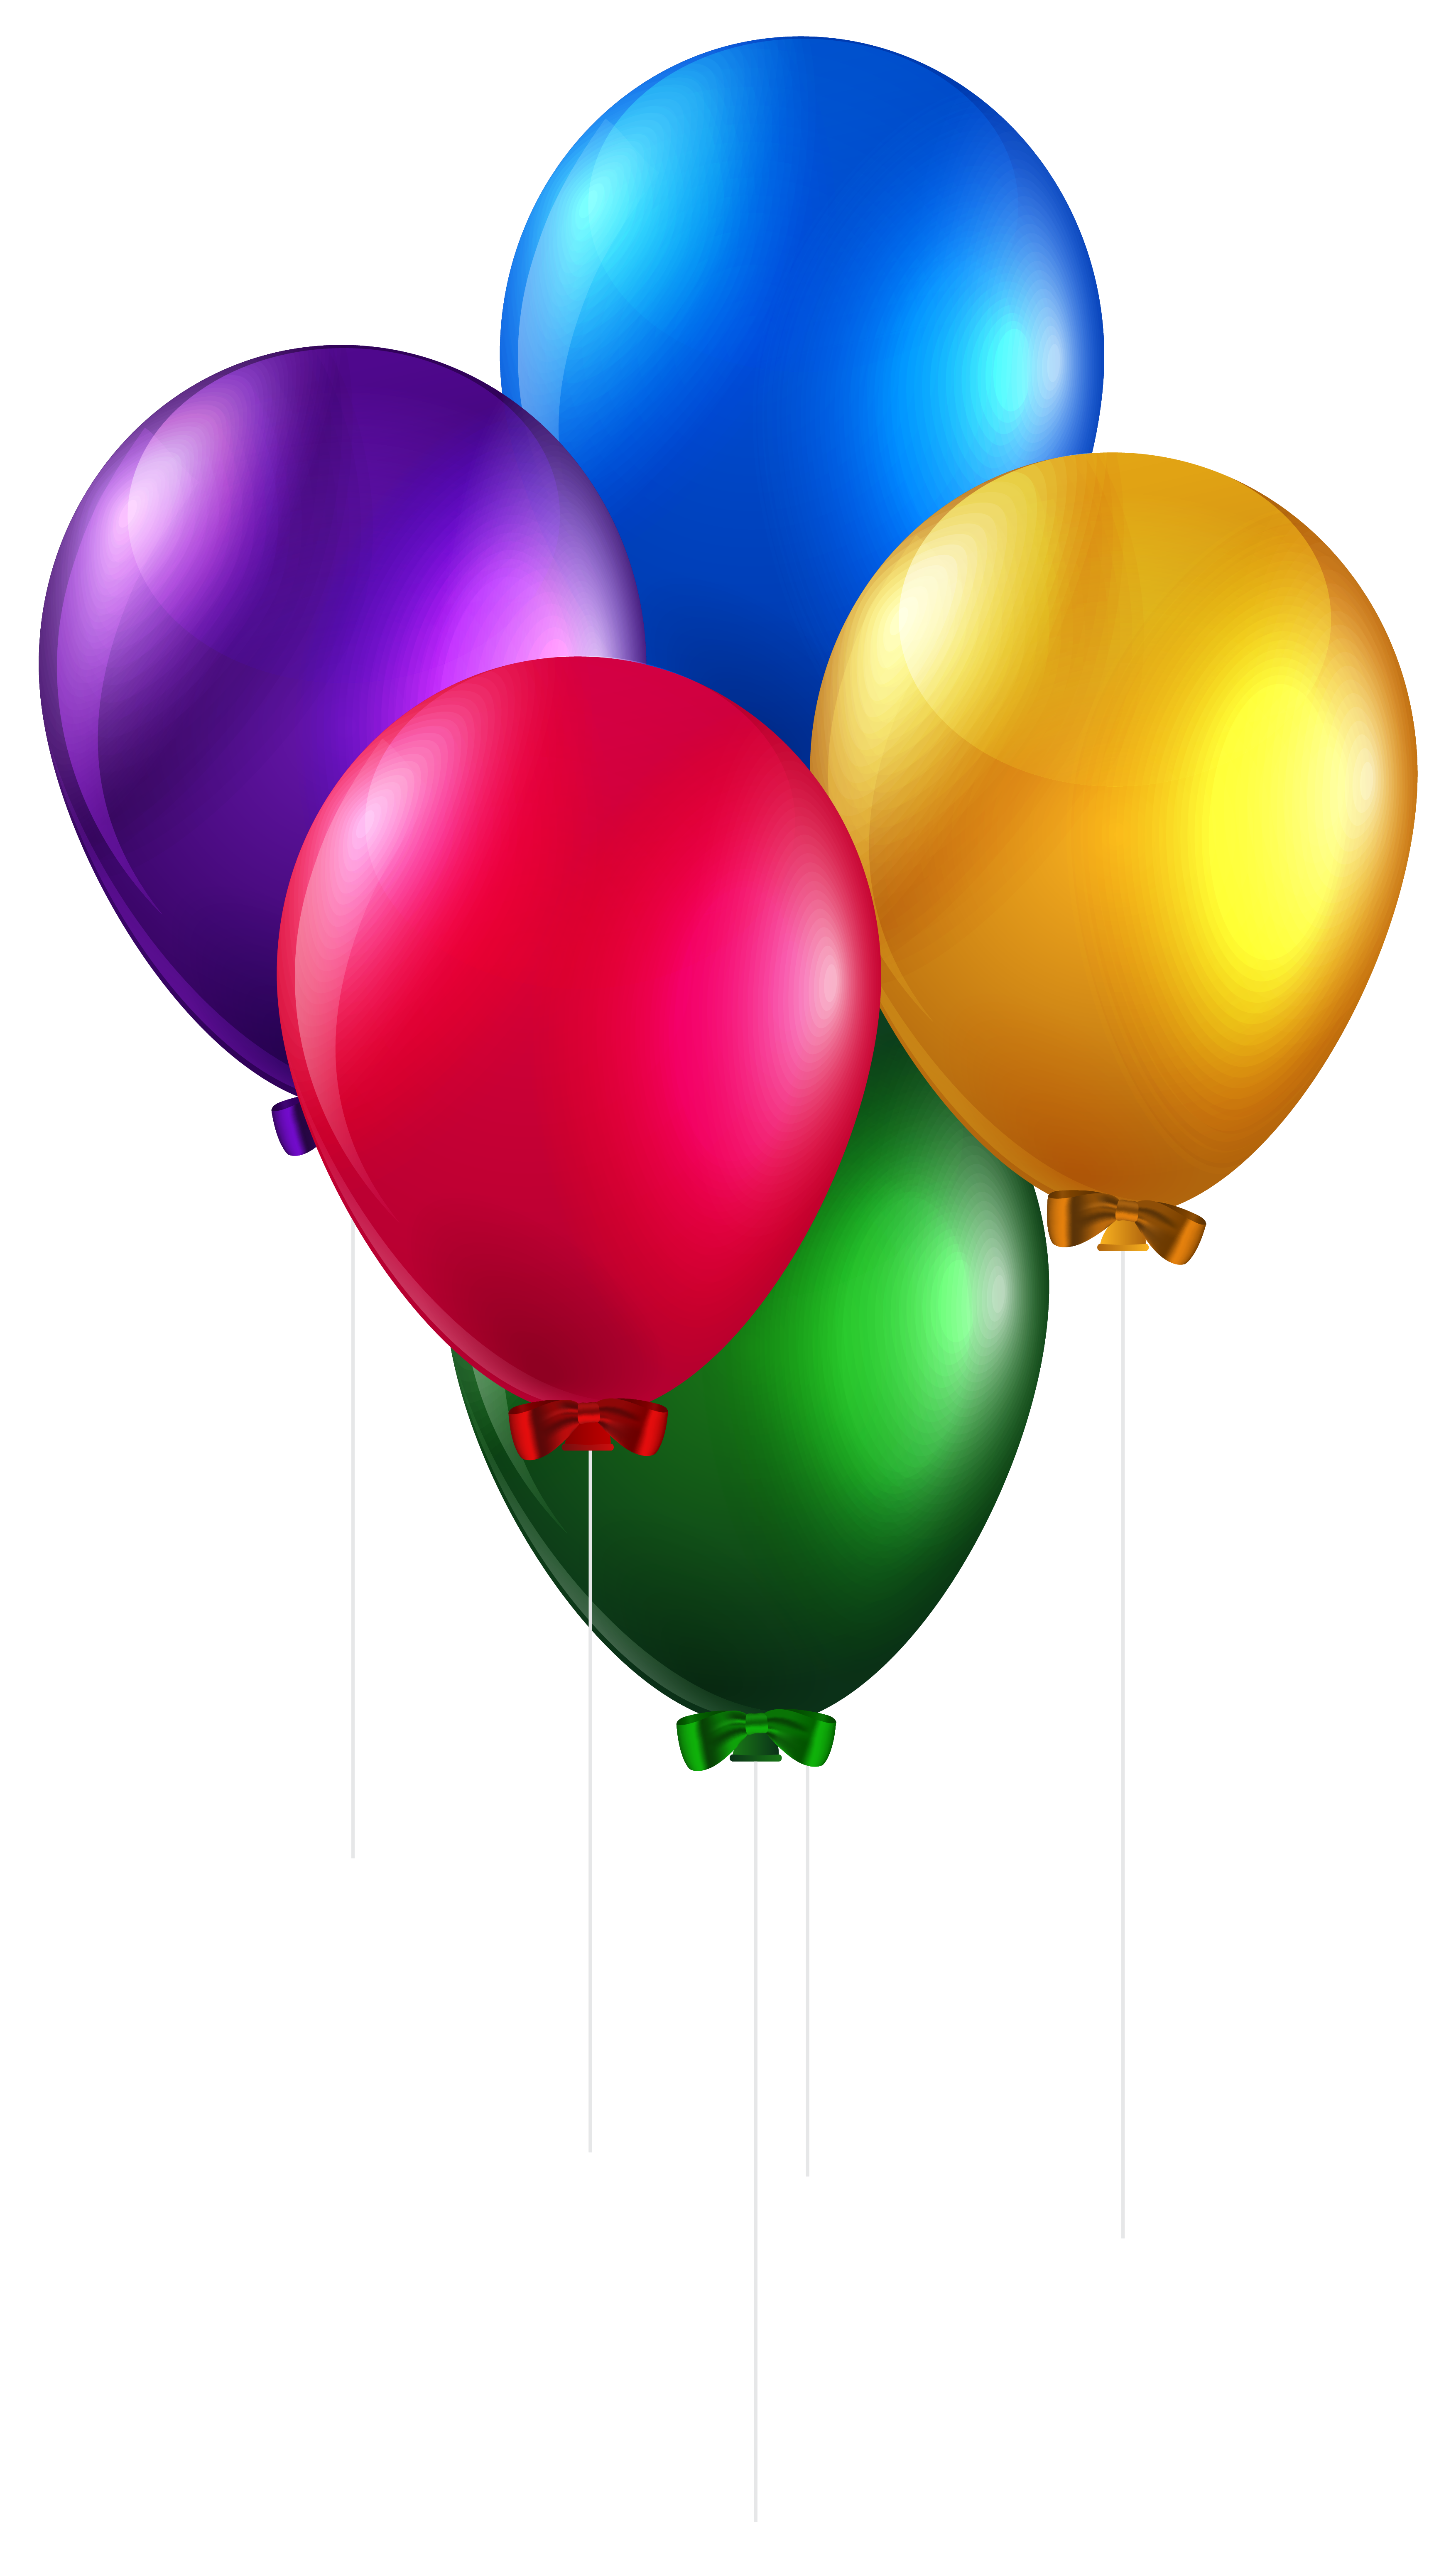 Balloon Clipart Free Balloons Png Images Download Free Transparent Png Logos